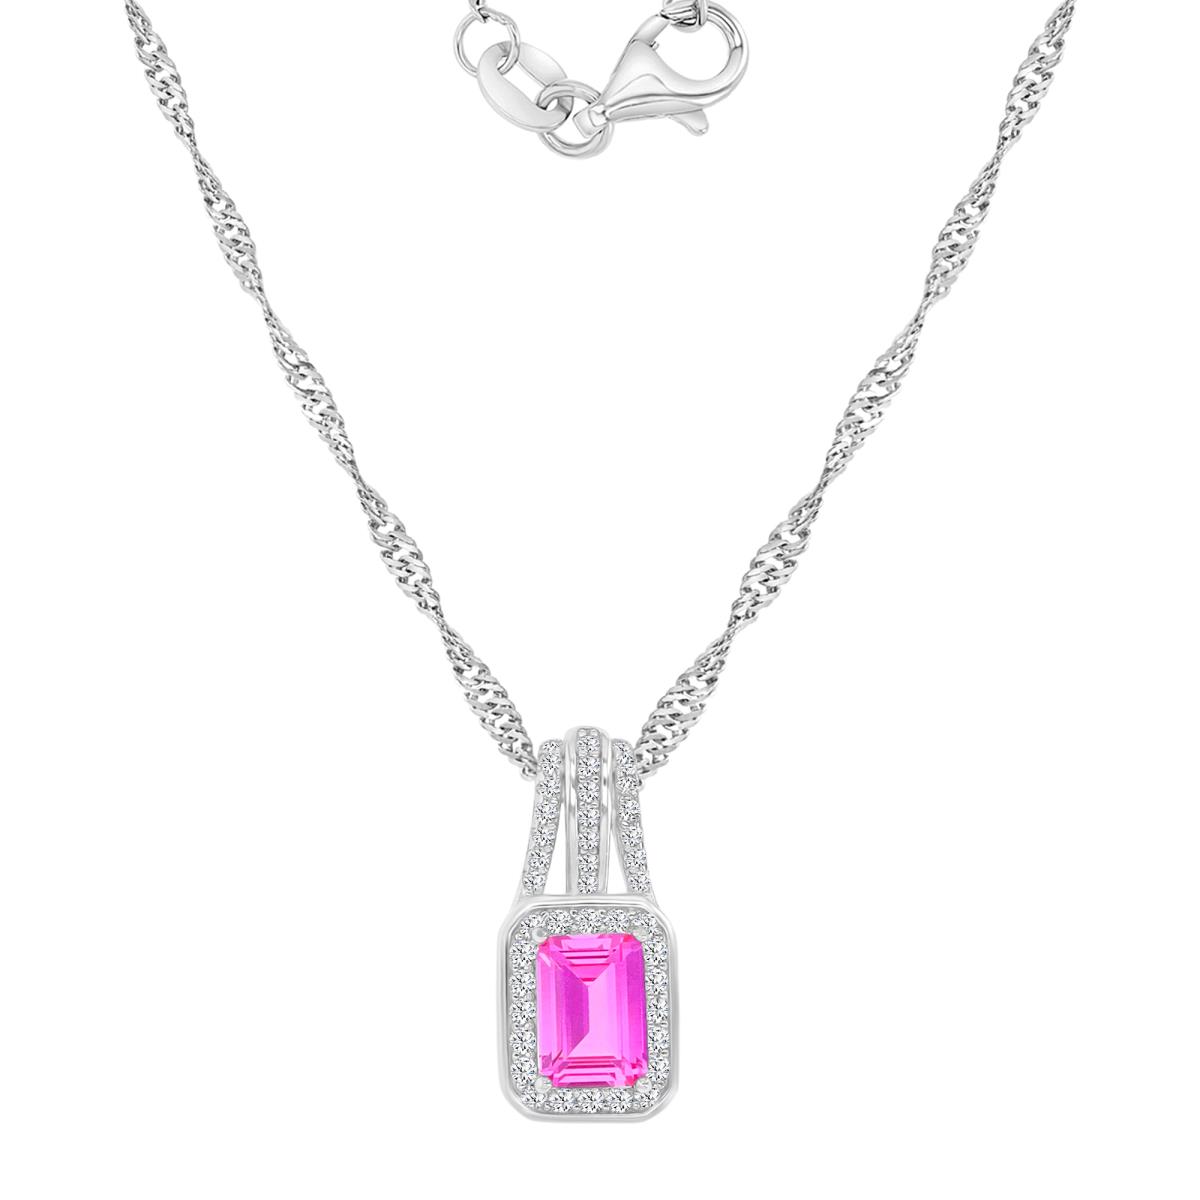 Sterling Silver Rhodium 18X8.3MM Polished Cr Pink Sapphire & Cr White Sapphire Emerald Cut Dangling Pendant Singapore Chain 18+2" Necklace